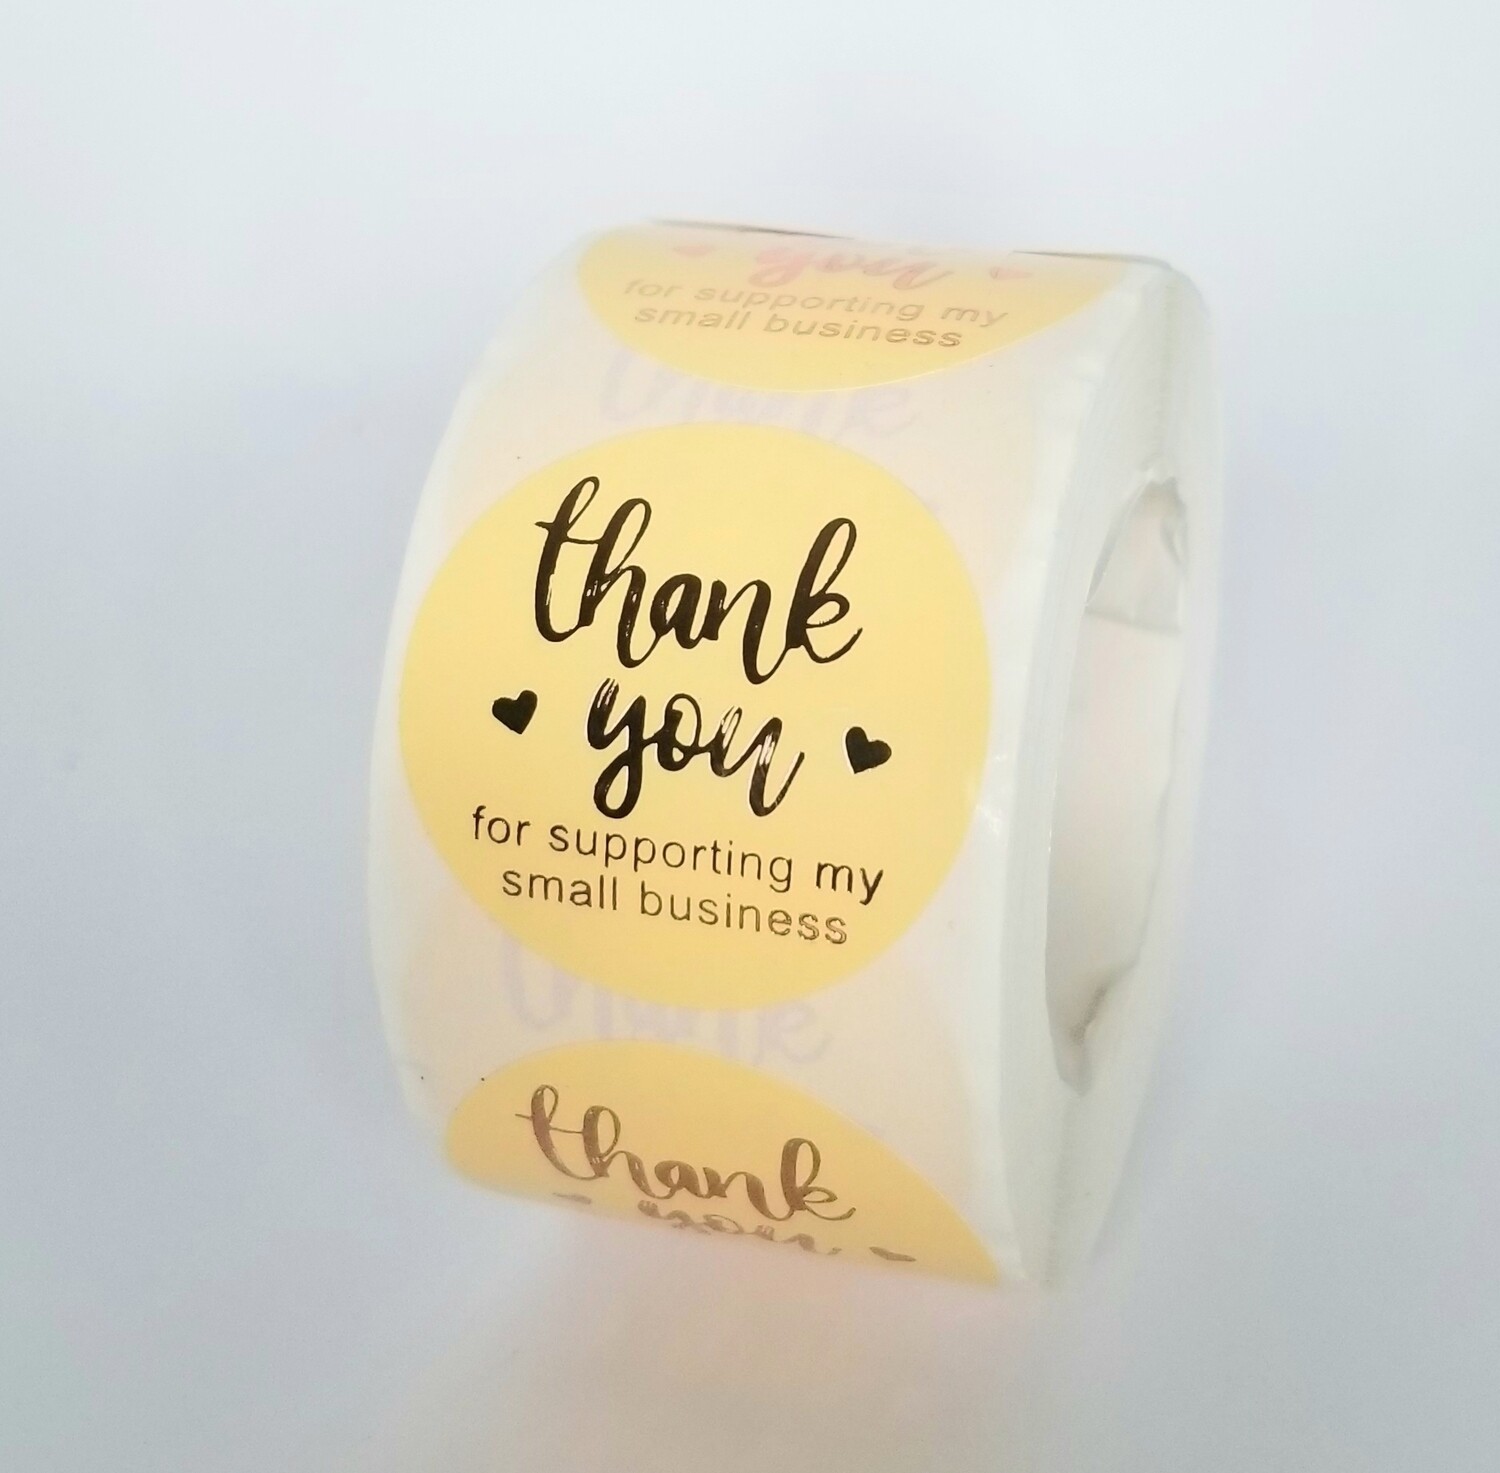 1.5" Thank You Stickers